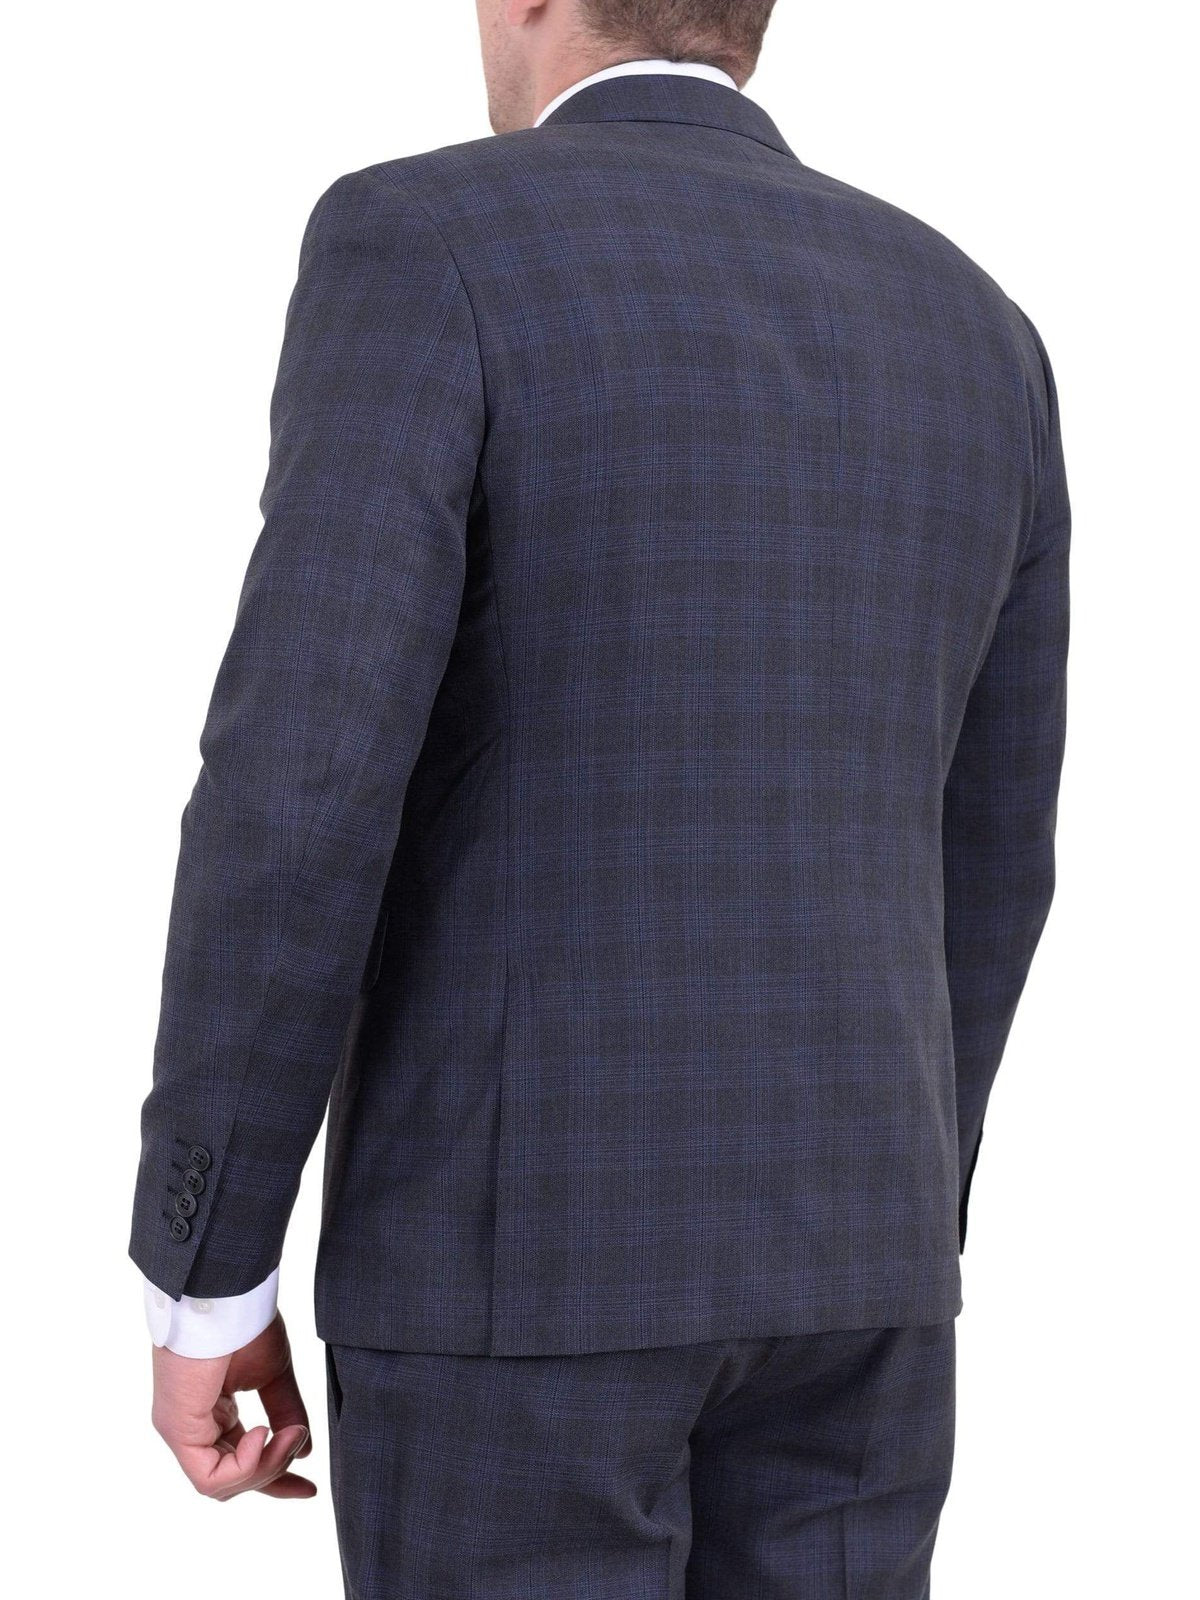 London Fog TWO PIECE SUITS Mens Slim Fit Charcoal Gray Plaid Two Button Wool Blend Suit